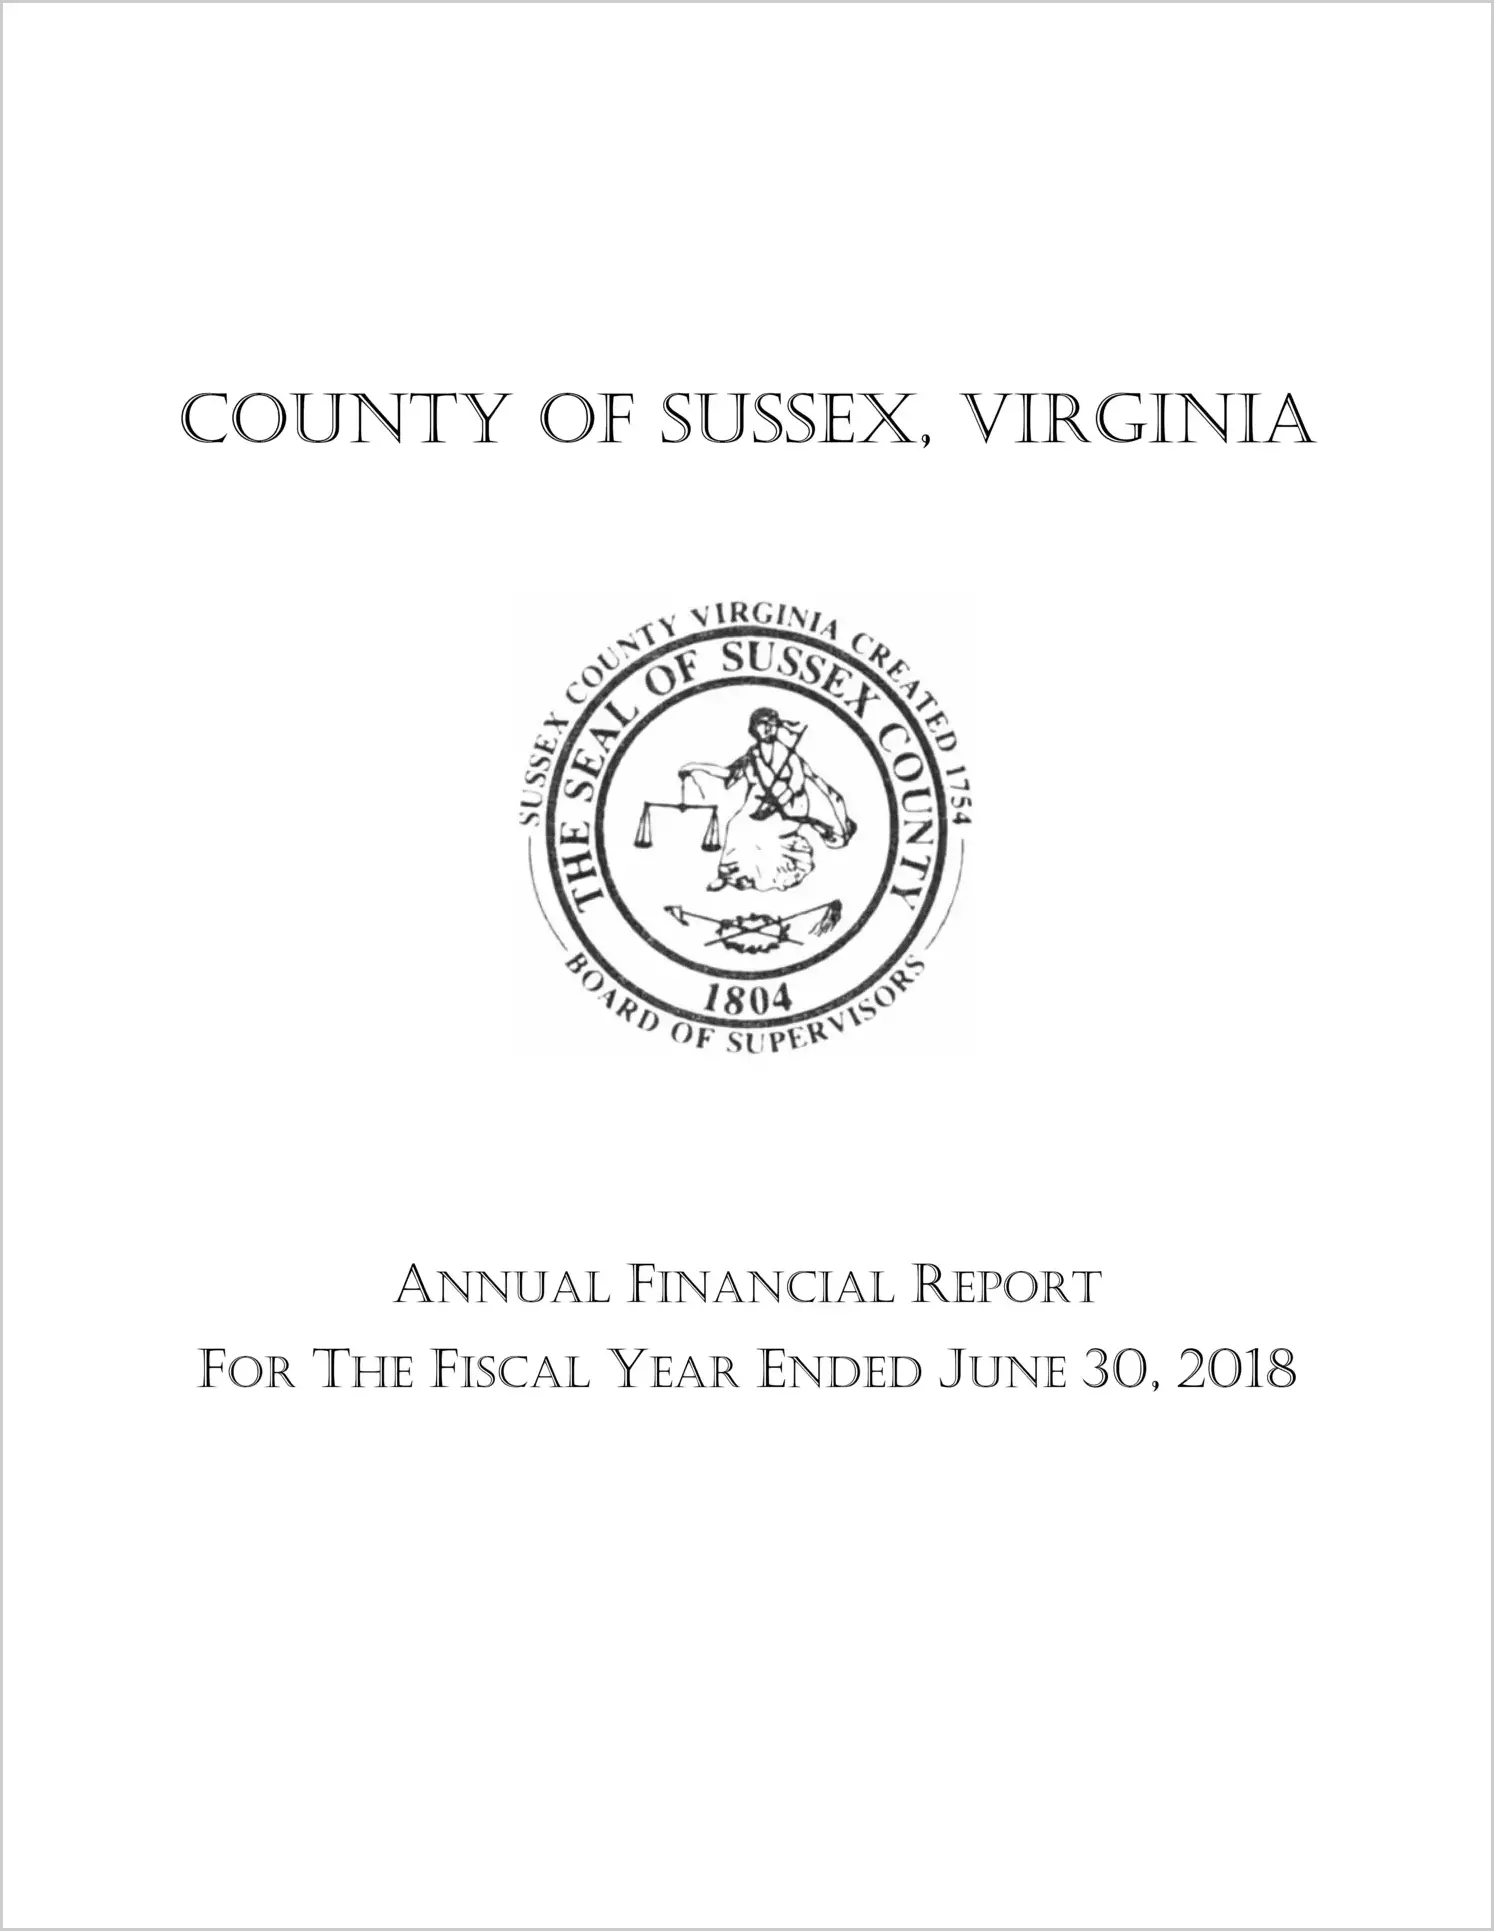 2018 Annual Financial Report for County of Sussex